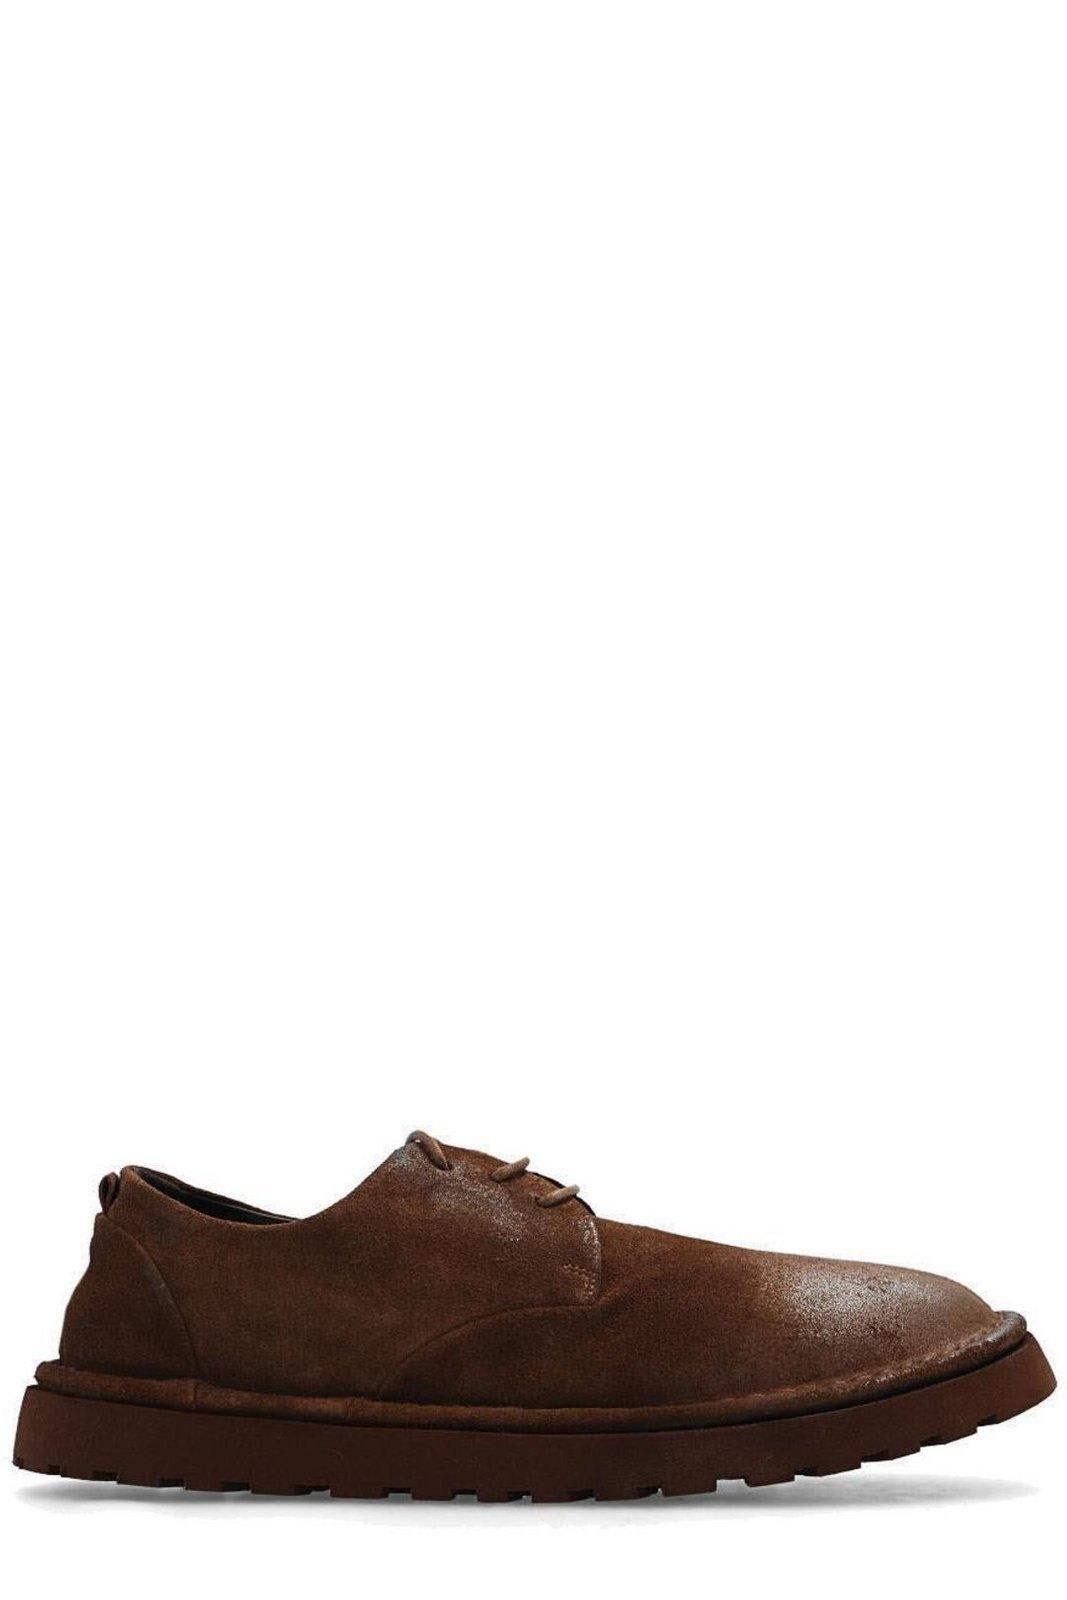 Marsell Lace-up Round Toe Derby Shoes